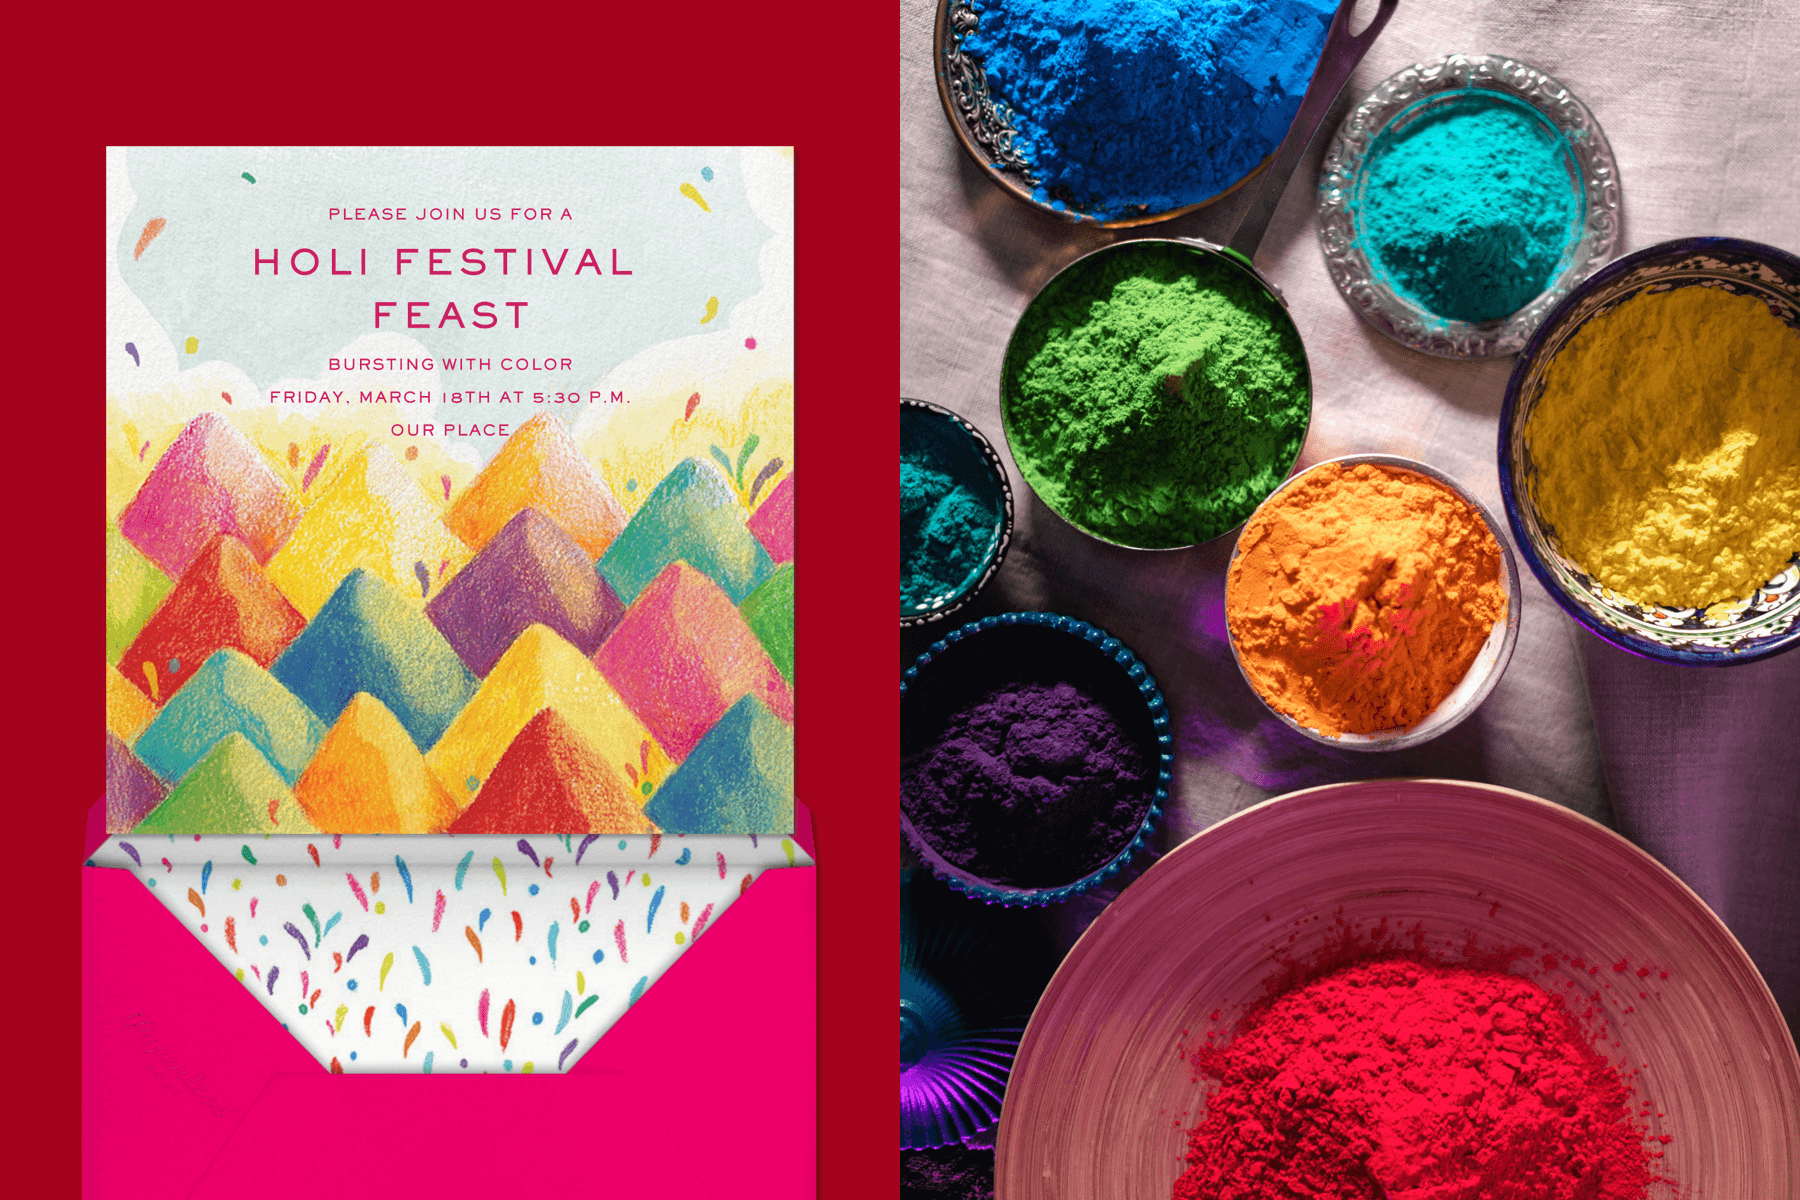 Left: A Holi invitation featuring mounds of colored powder; Right: Overhead view of bowls of brightly colored powder.